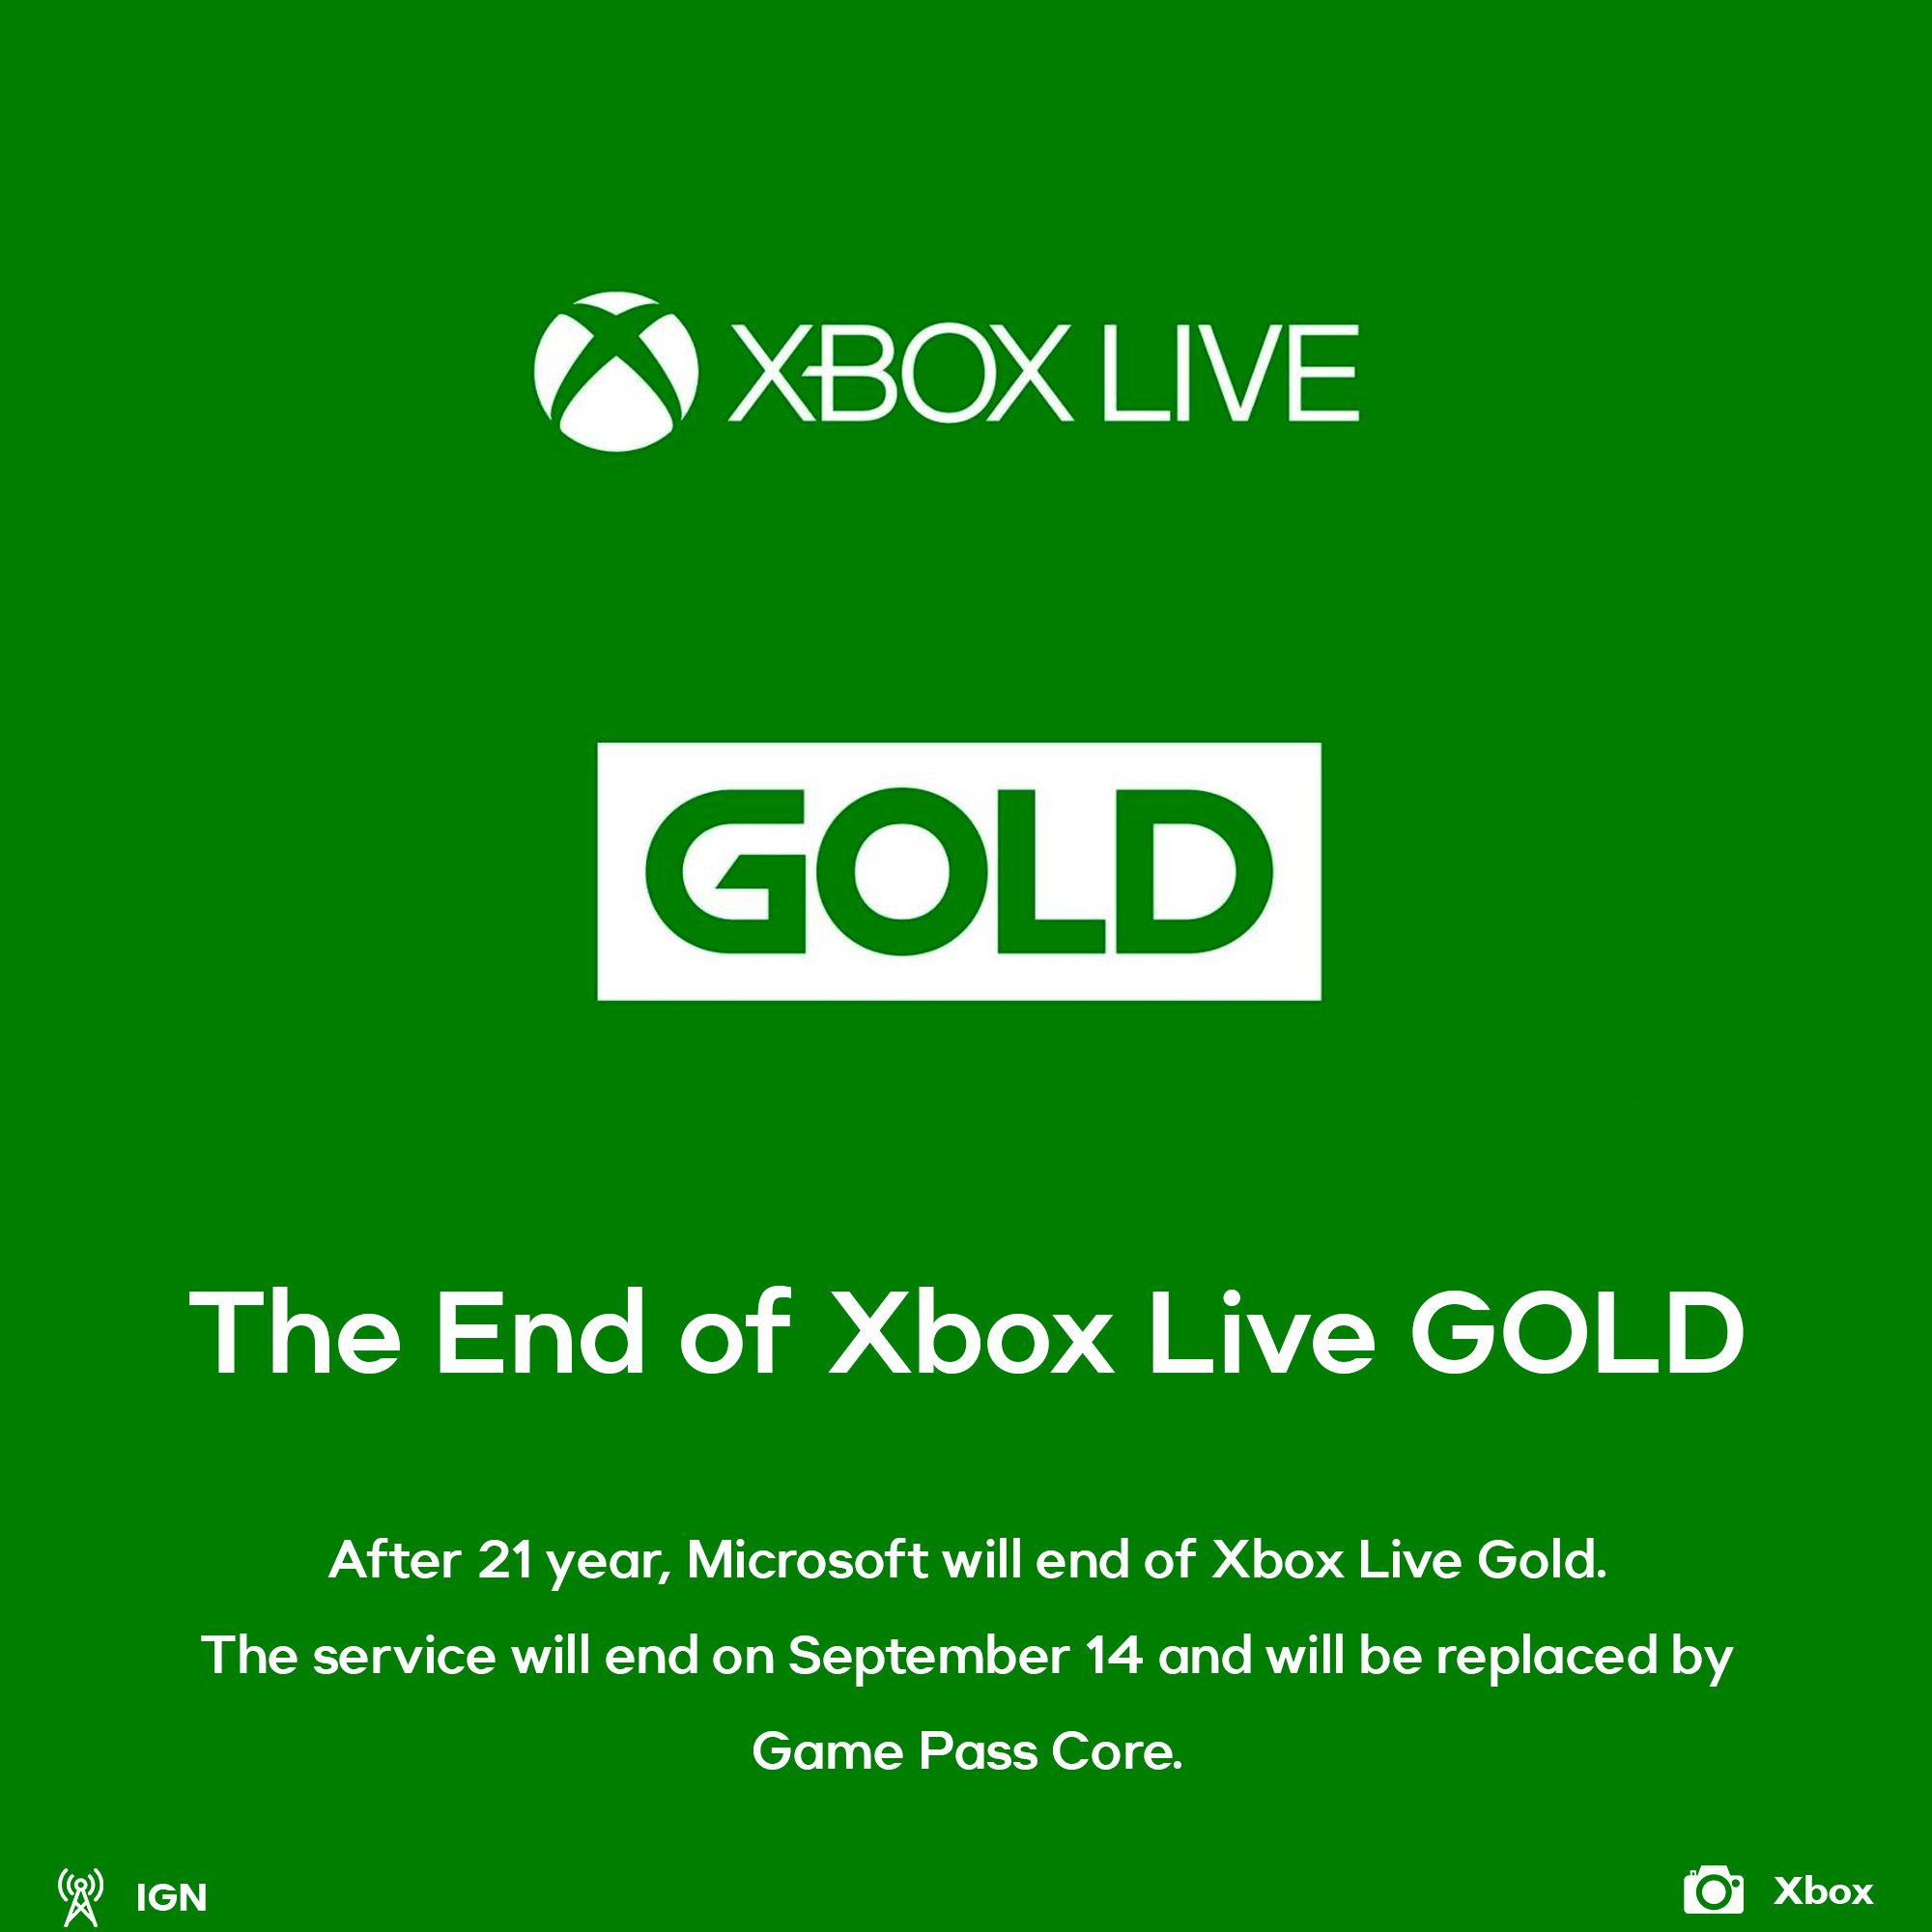 The end of Xbox Live Gold